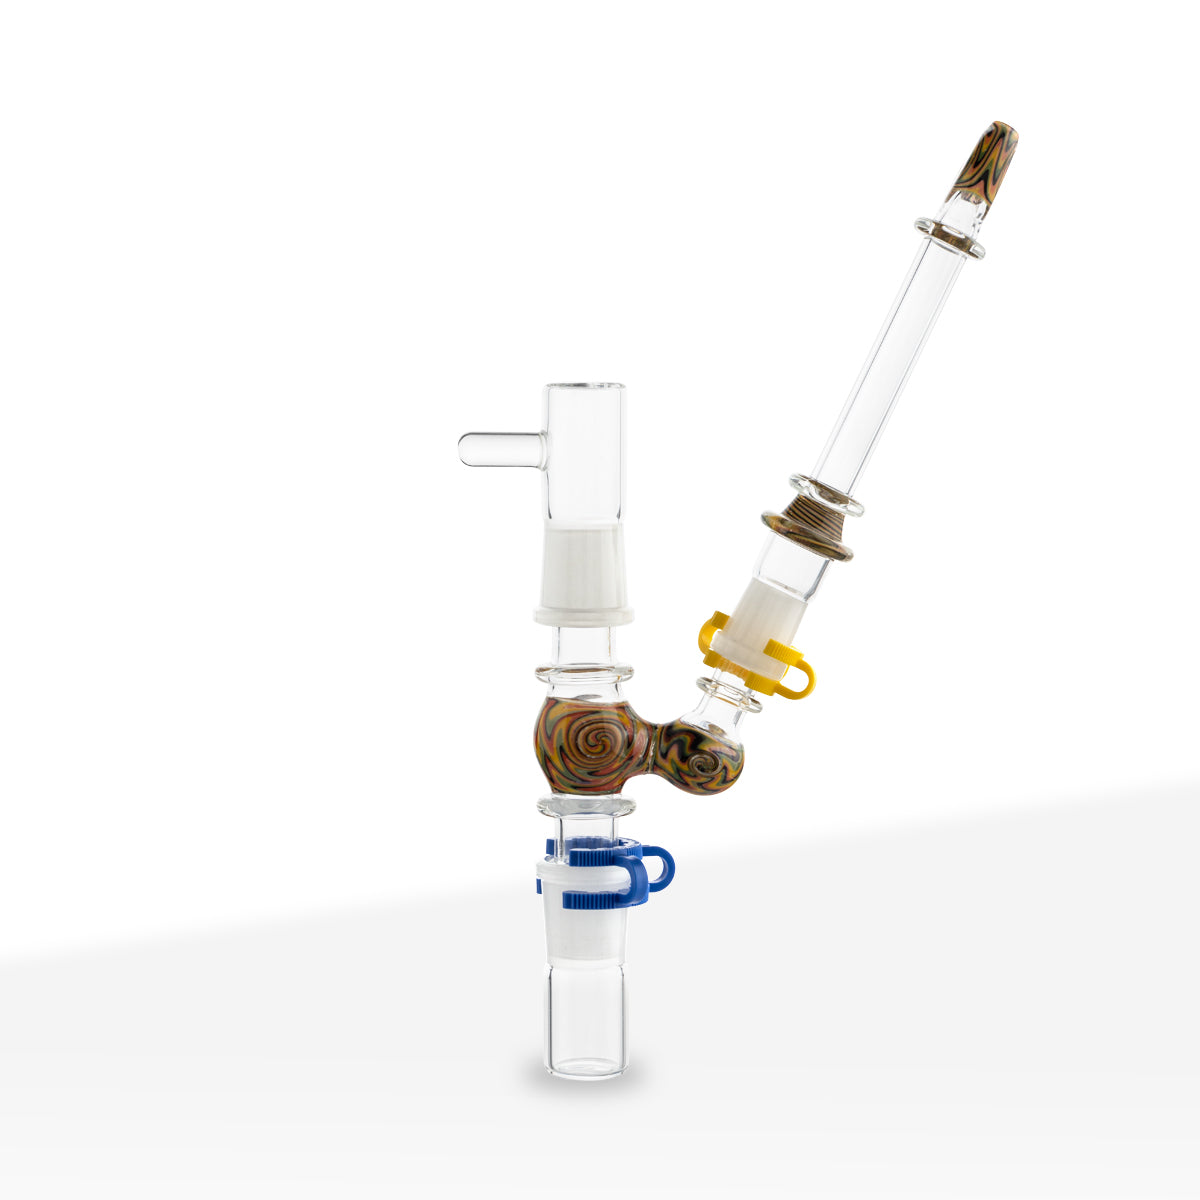 8" Dual-Piece Nail and Dome Dry Pipe/Attachment with Reclaim Catcher - 19mm Male